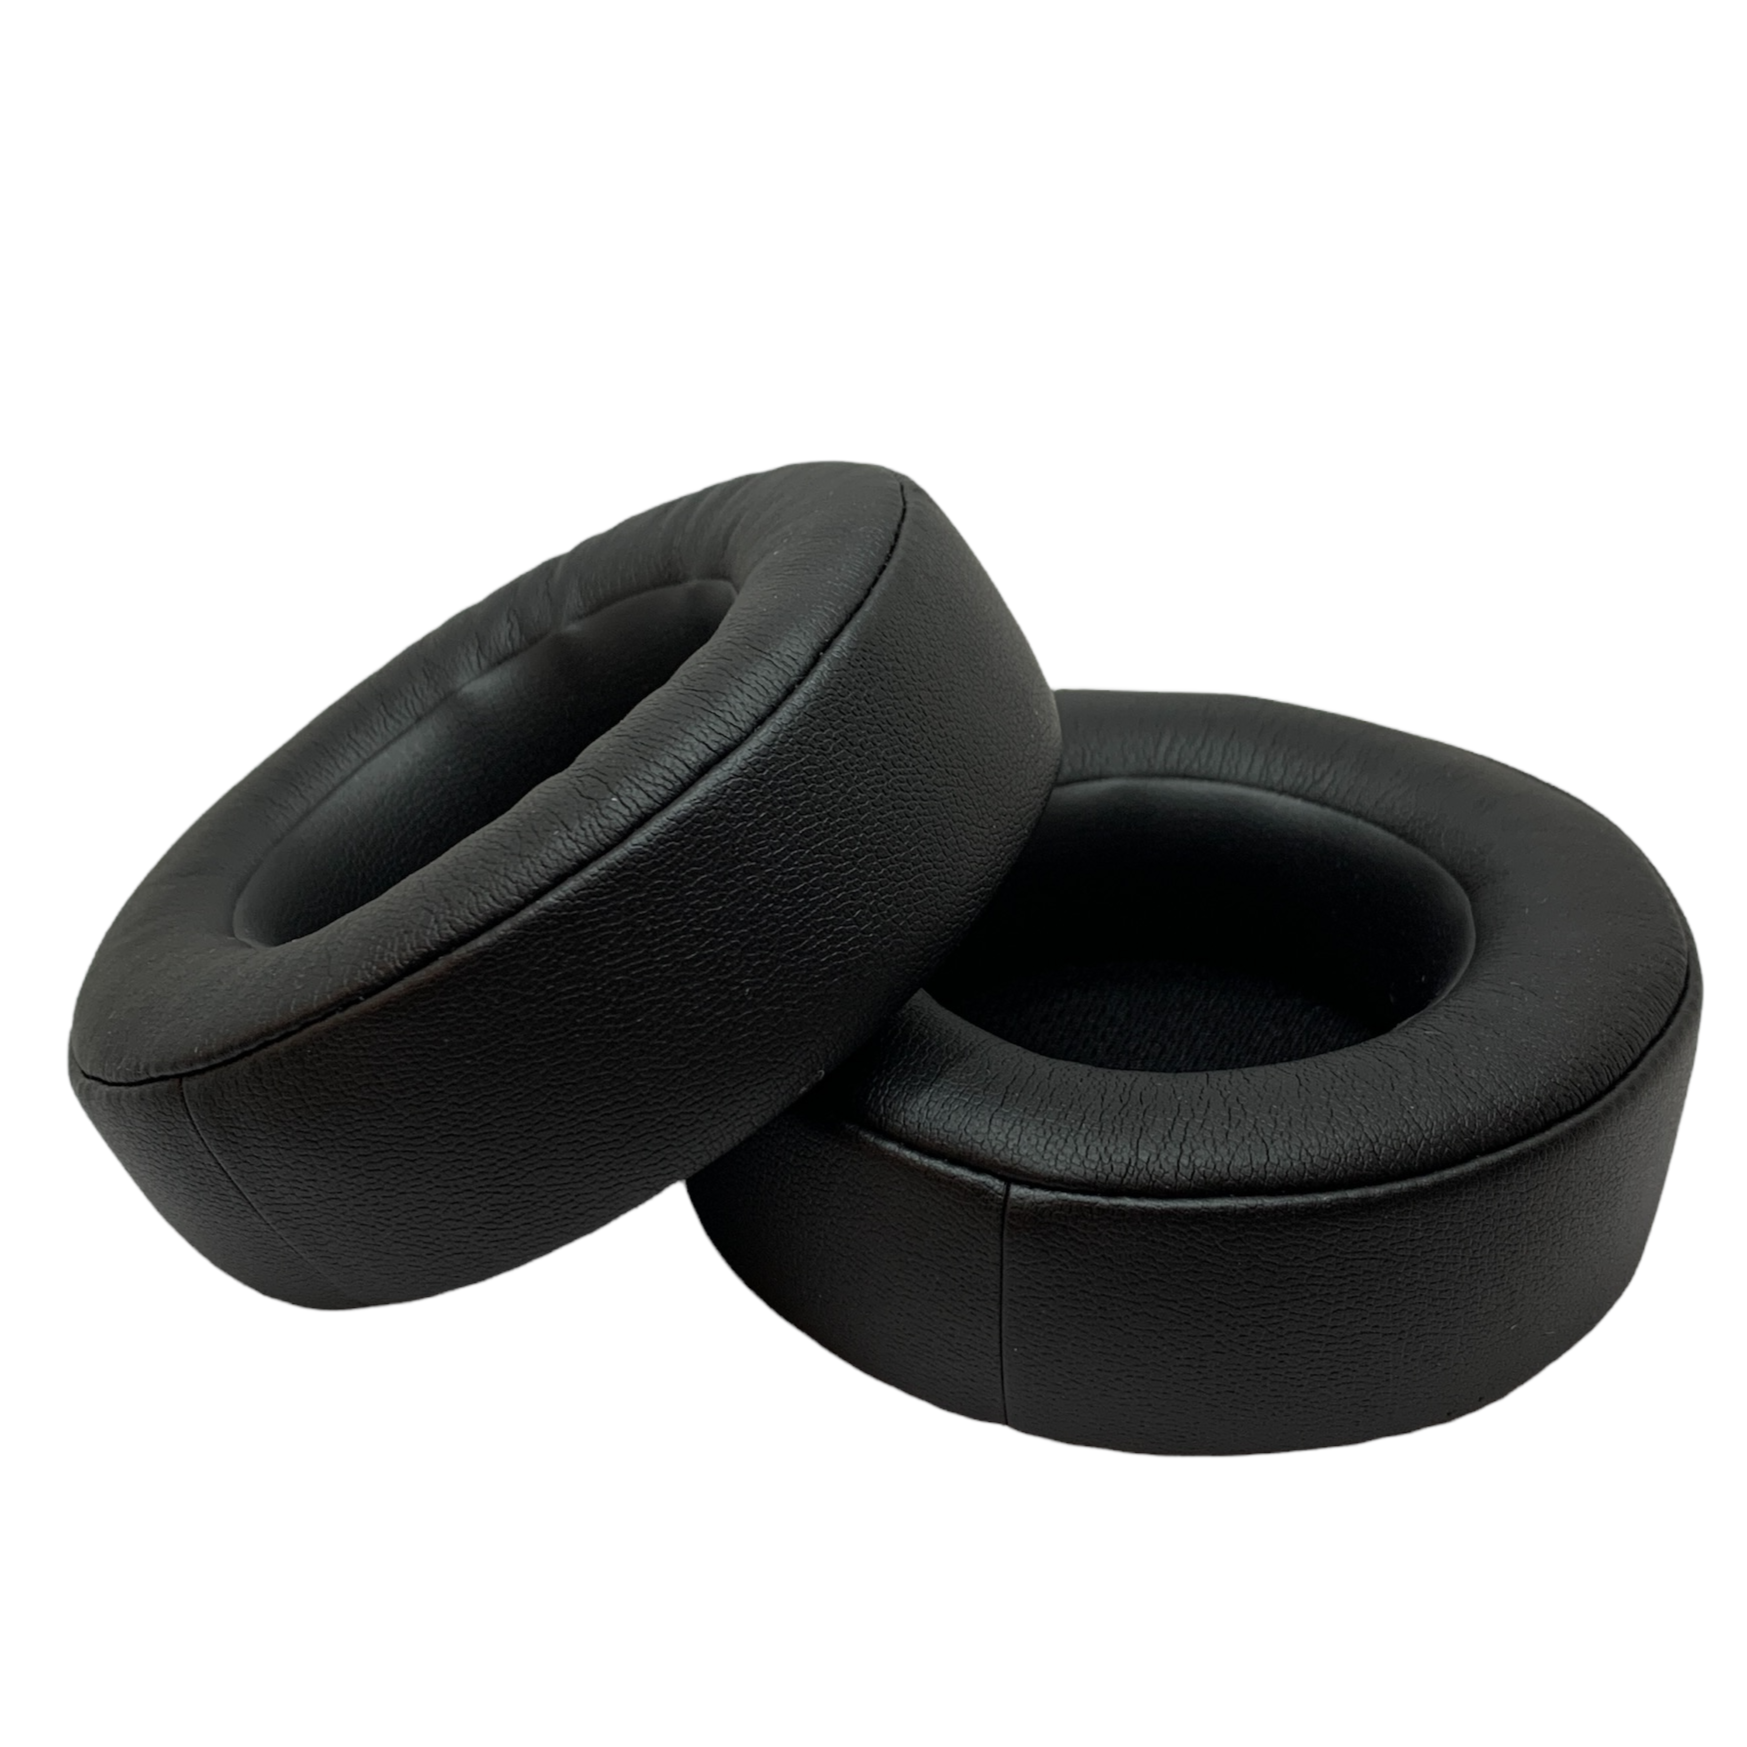 CentralSound Premium Upgraded Ear Pad Cushions for Corsair Virtuous RGB Wireless SE Gaming Headsets - CentralSound